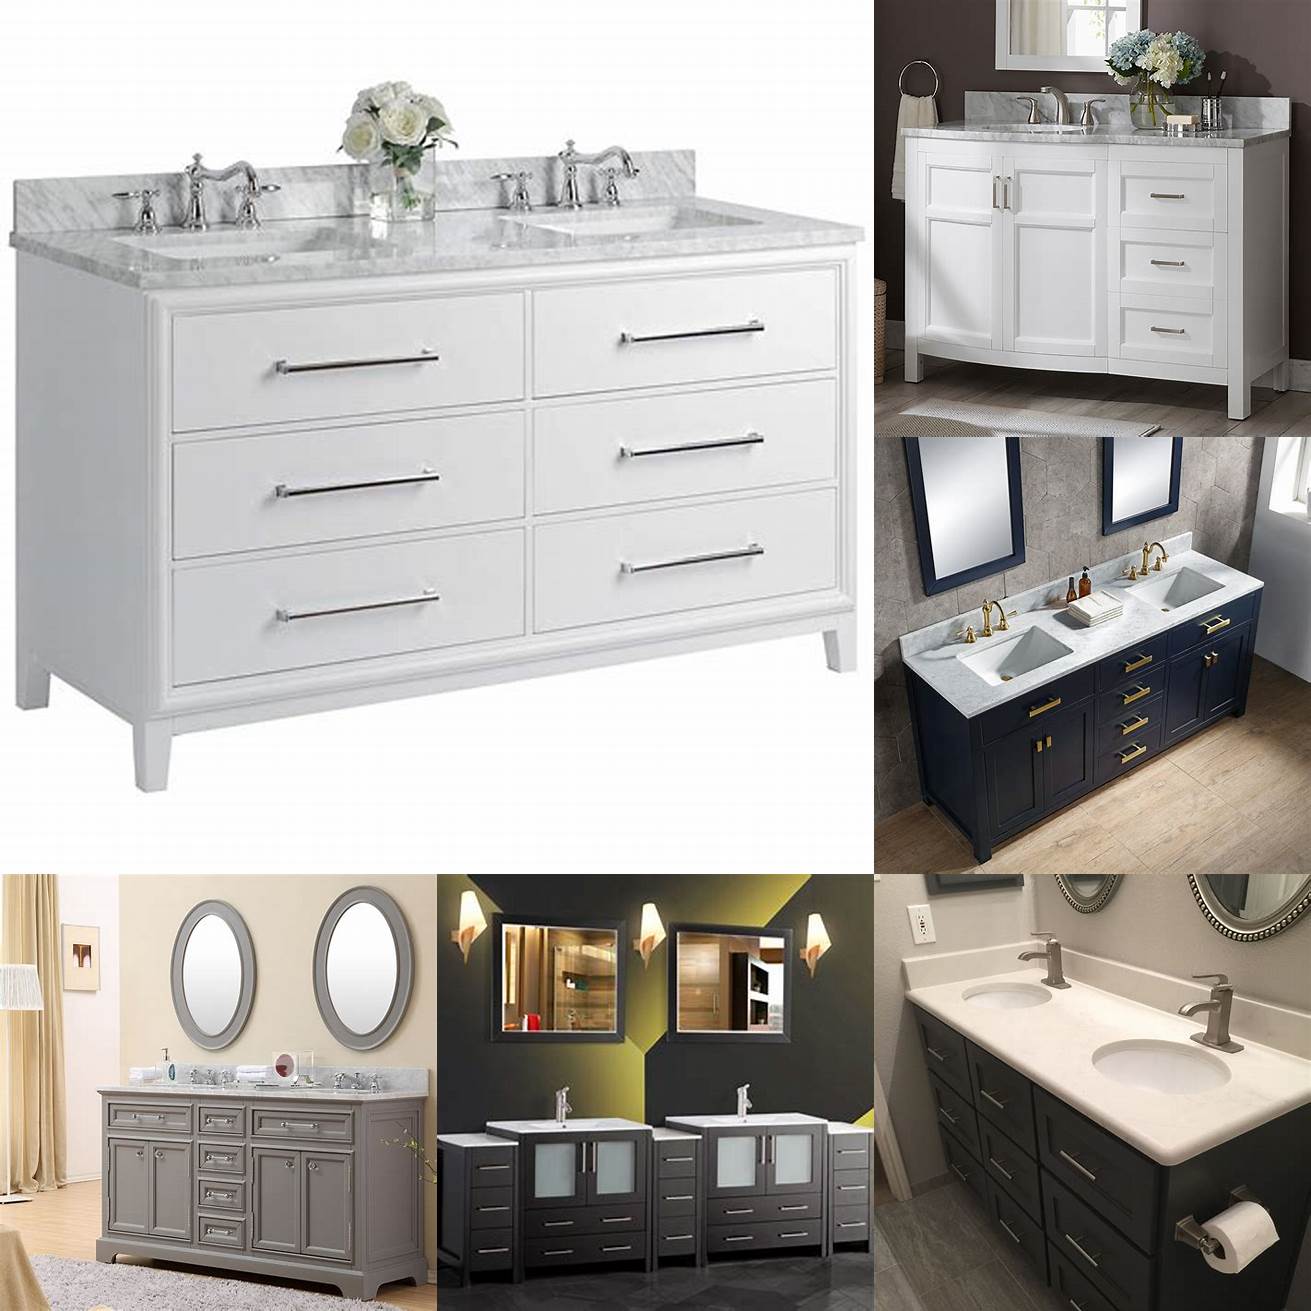 Double Sink Bathroom Vanity with Drawers on Left Side